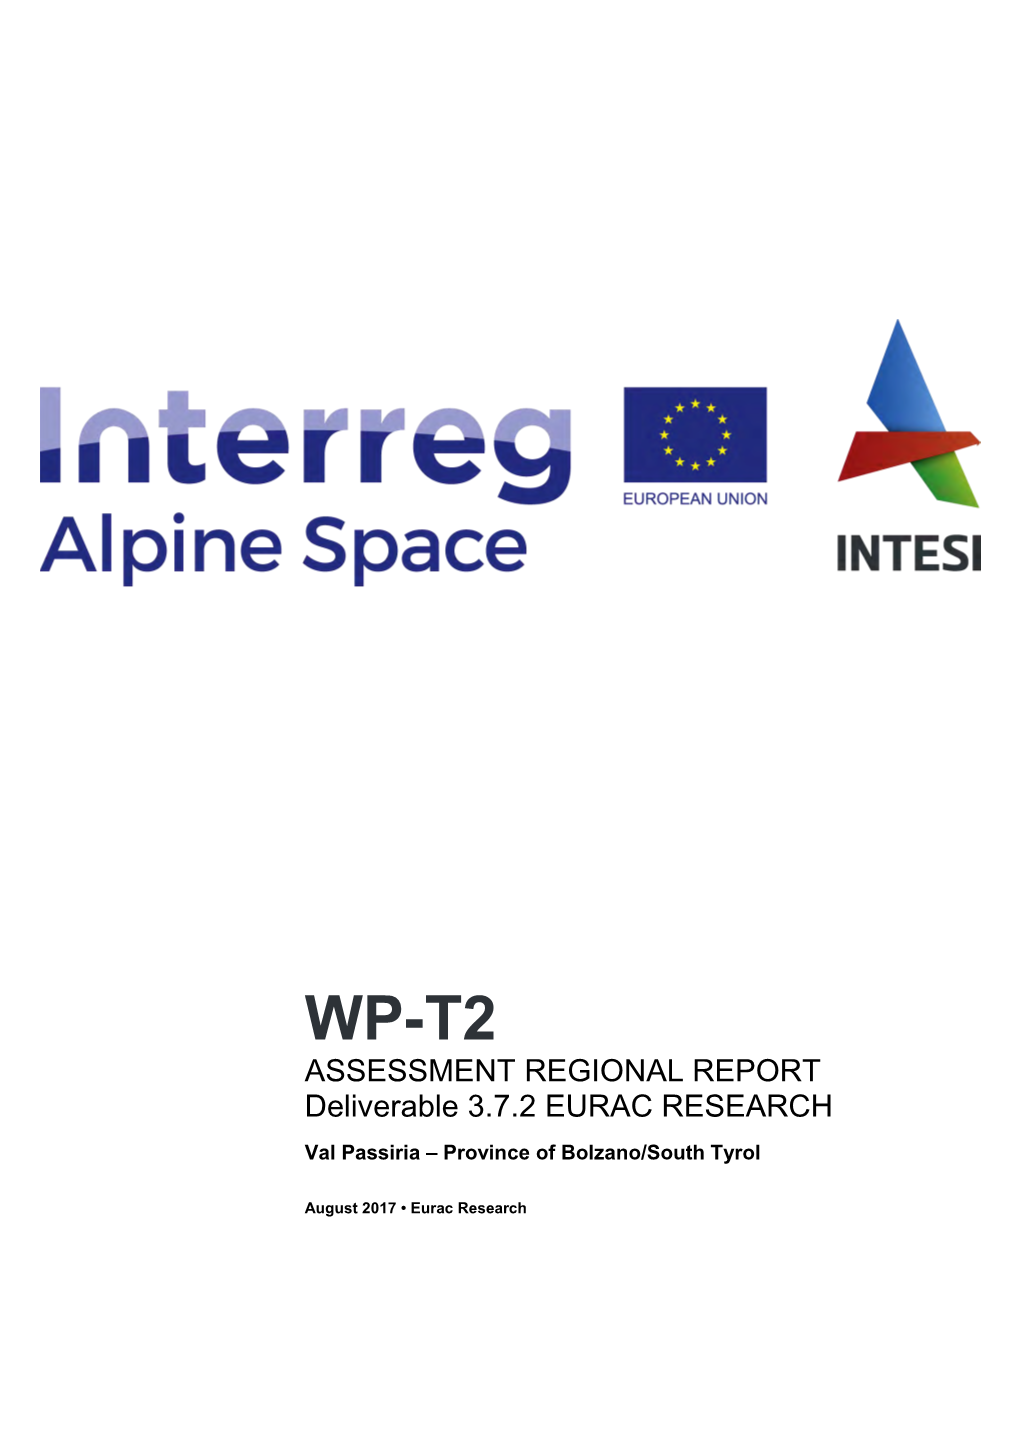 ASSESSMENT REGIONAL REPORT Deliverable 3.7.2 EURAC RESEARCH